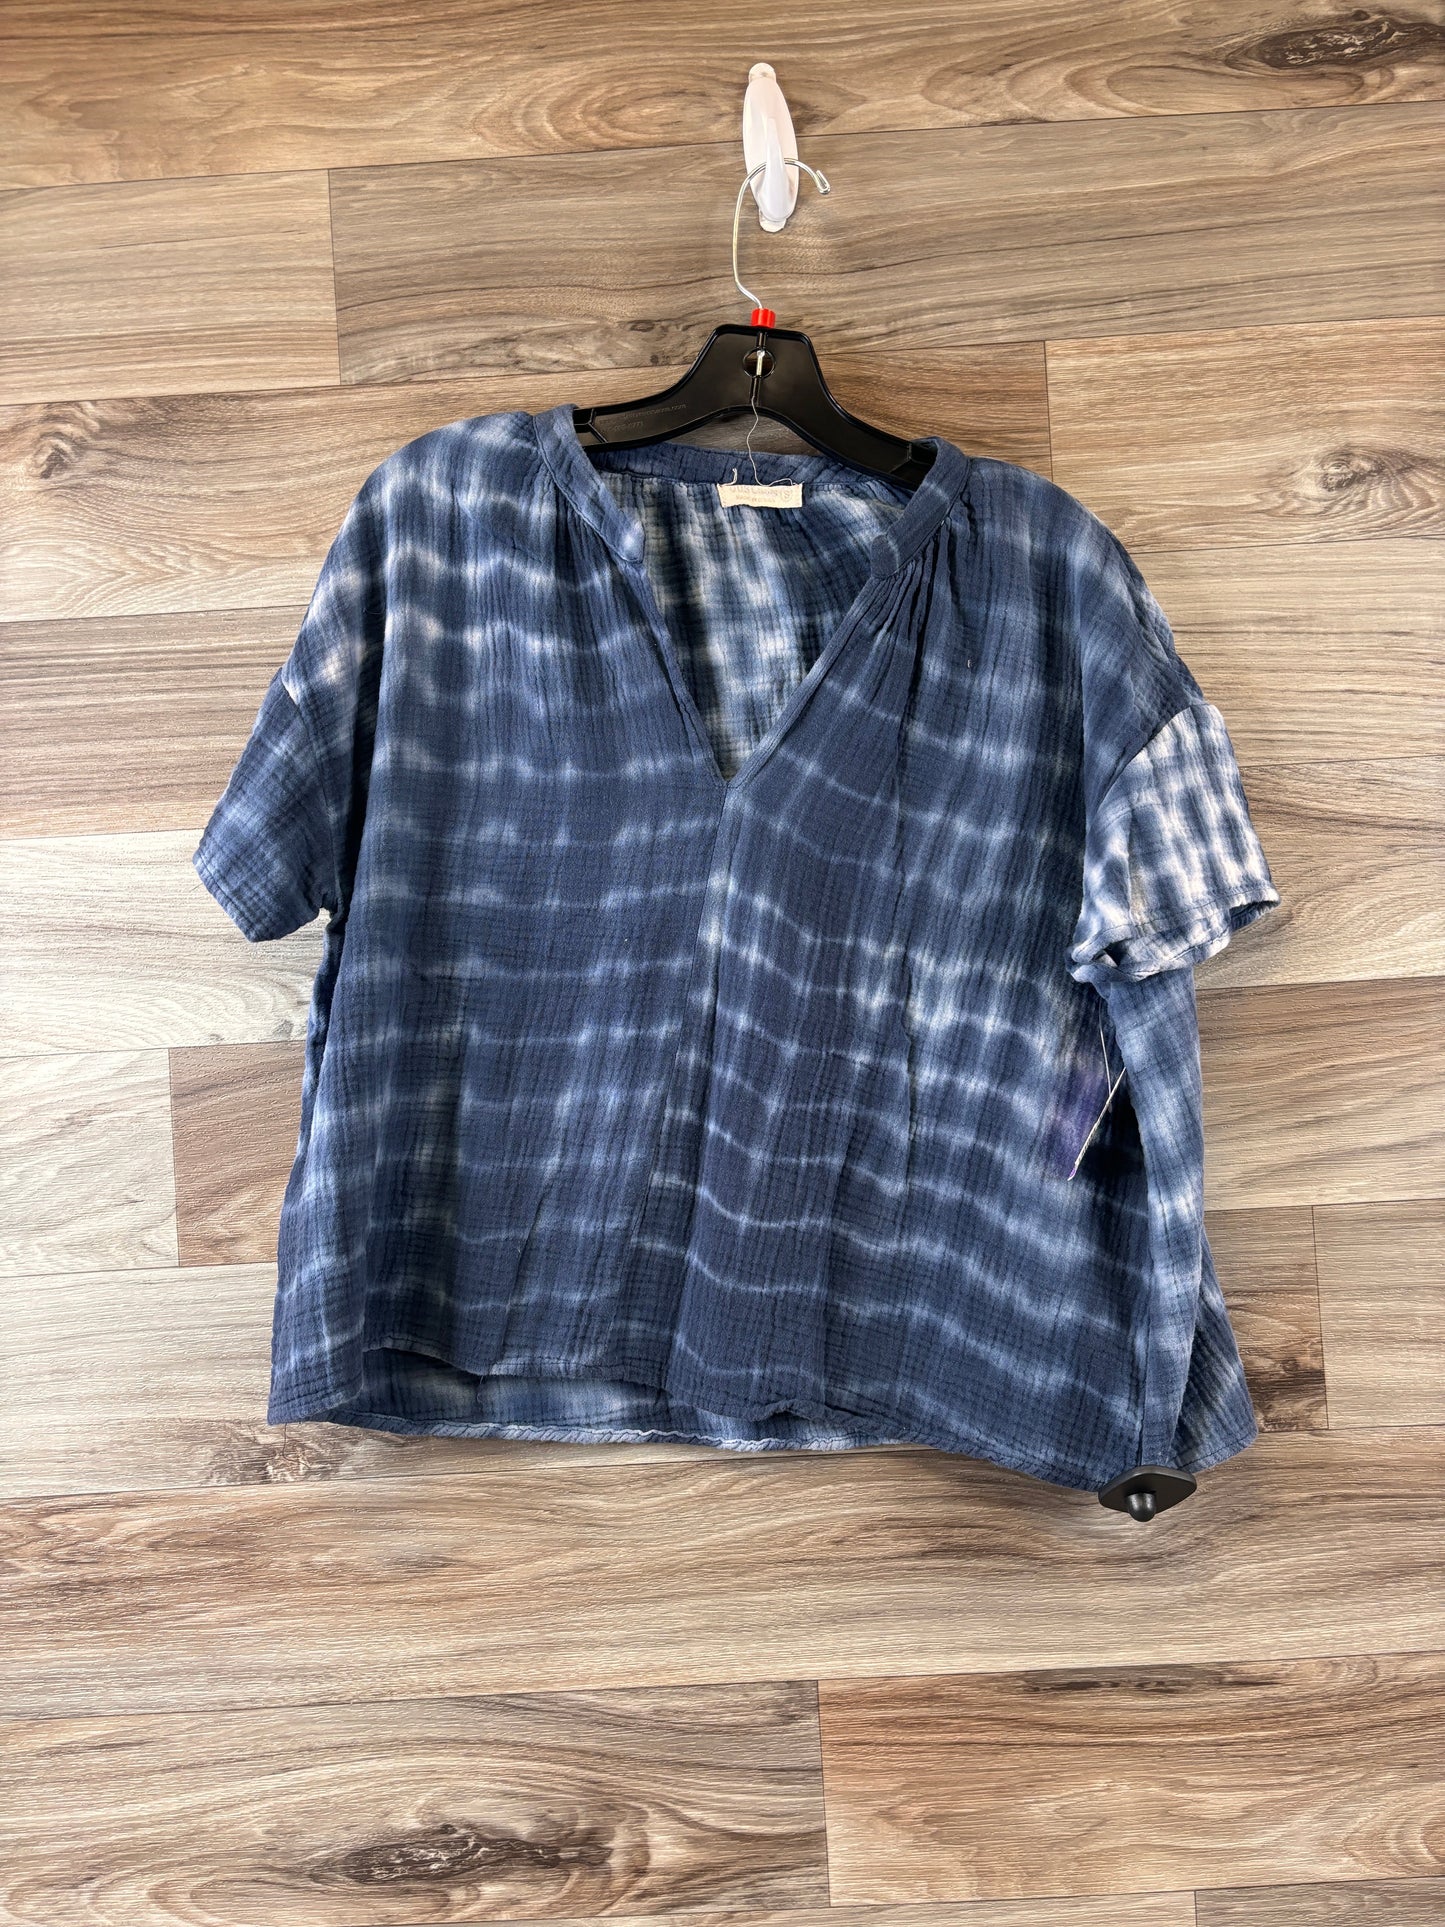 Blue Top Short Sleeve Just Living, Size S